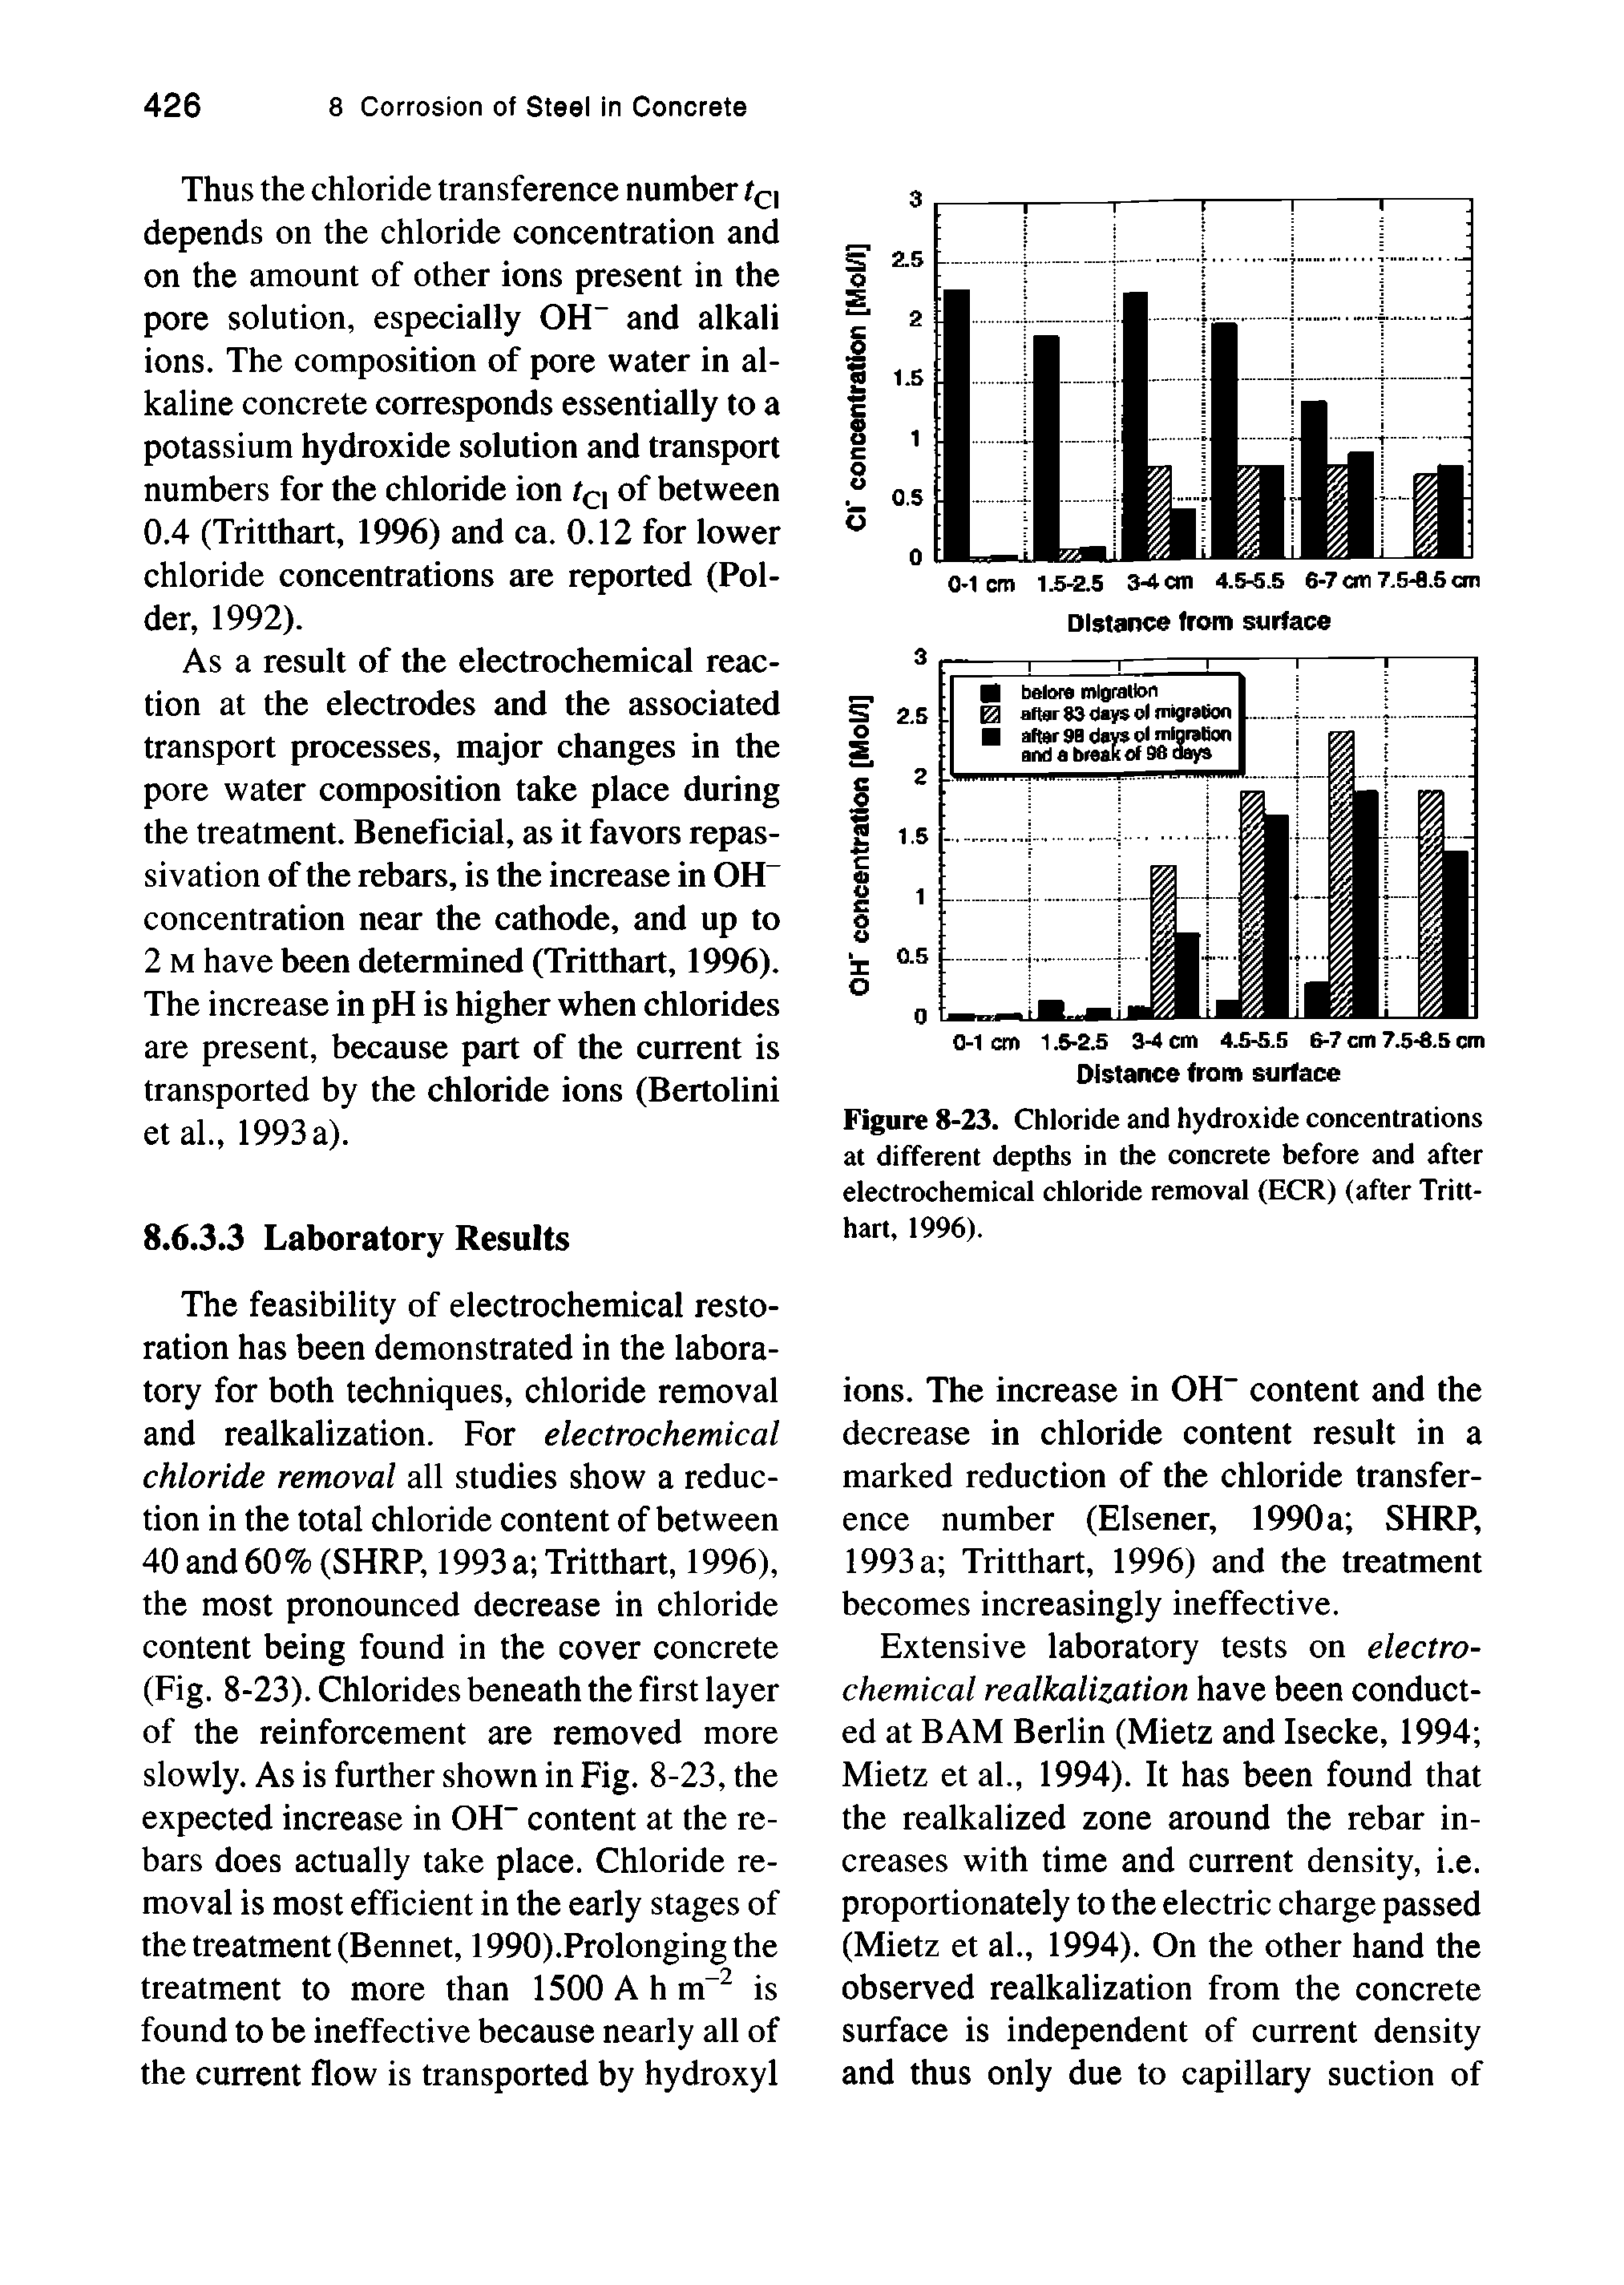 Figure 8-23. Chloride and hydroxide concentrations at different depths in the concrete before and after electrochemical chloride removal (ECR) (after Tritthart, 1996).